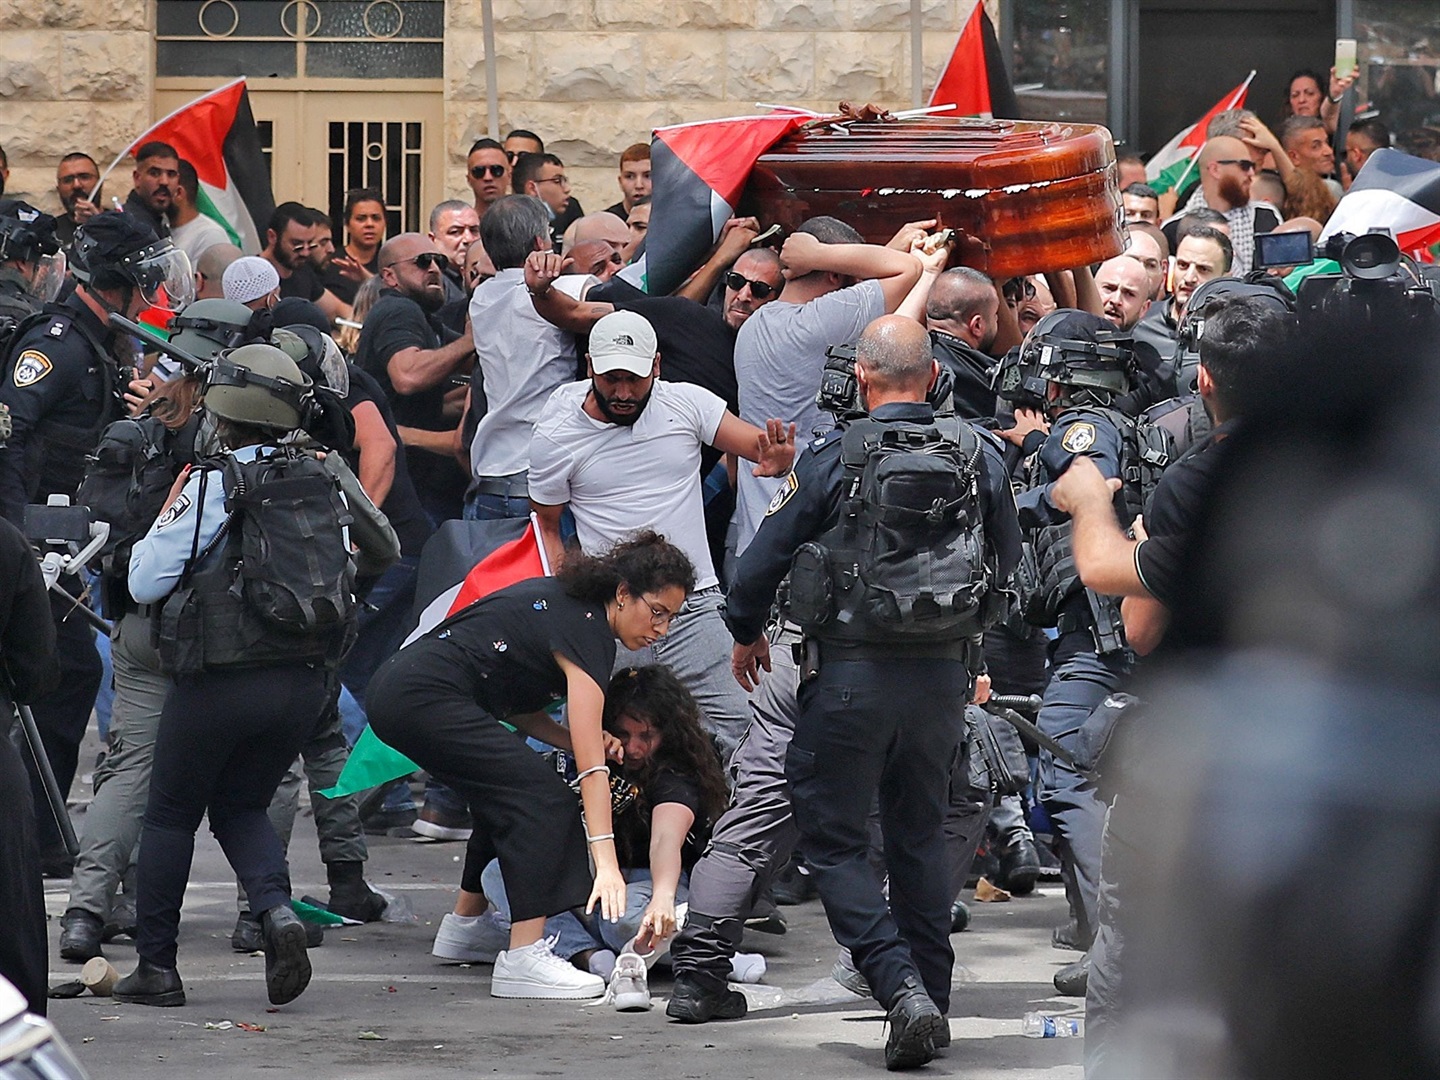 Violence erupts as Israeli security forces assault Palestinian mourners carrying the casket of slain Al Jazeera journalist Shireen Abu Akleh on Friday. Photo: Ahmad Gharabli/AFP via Getty Images